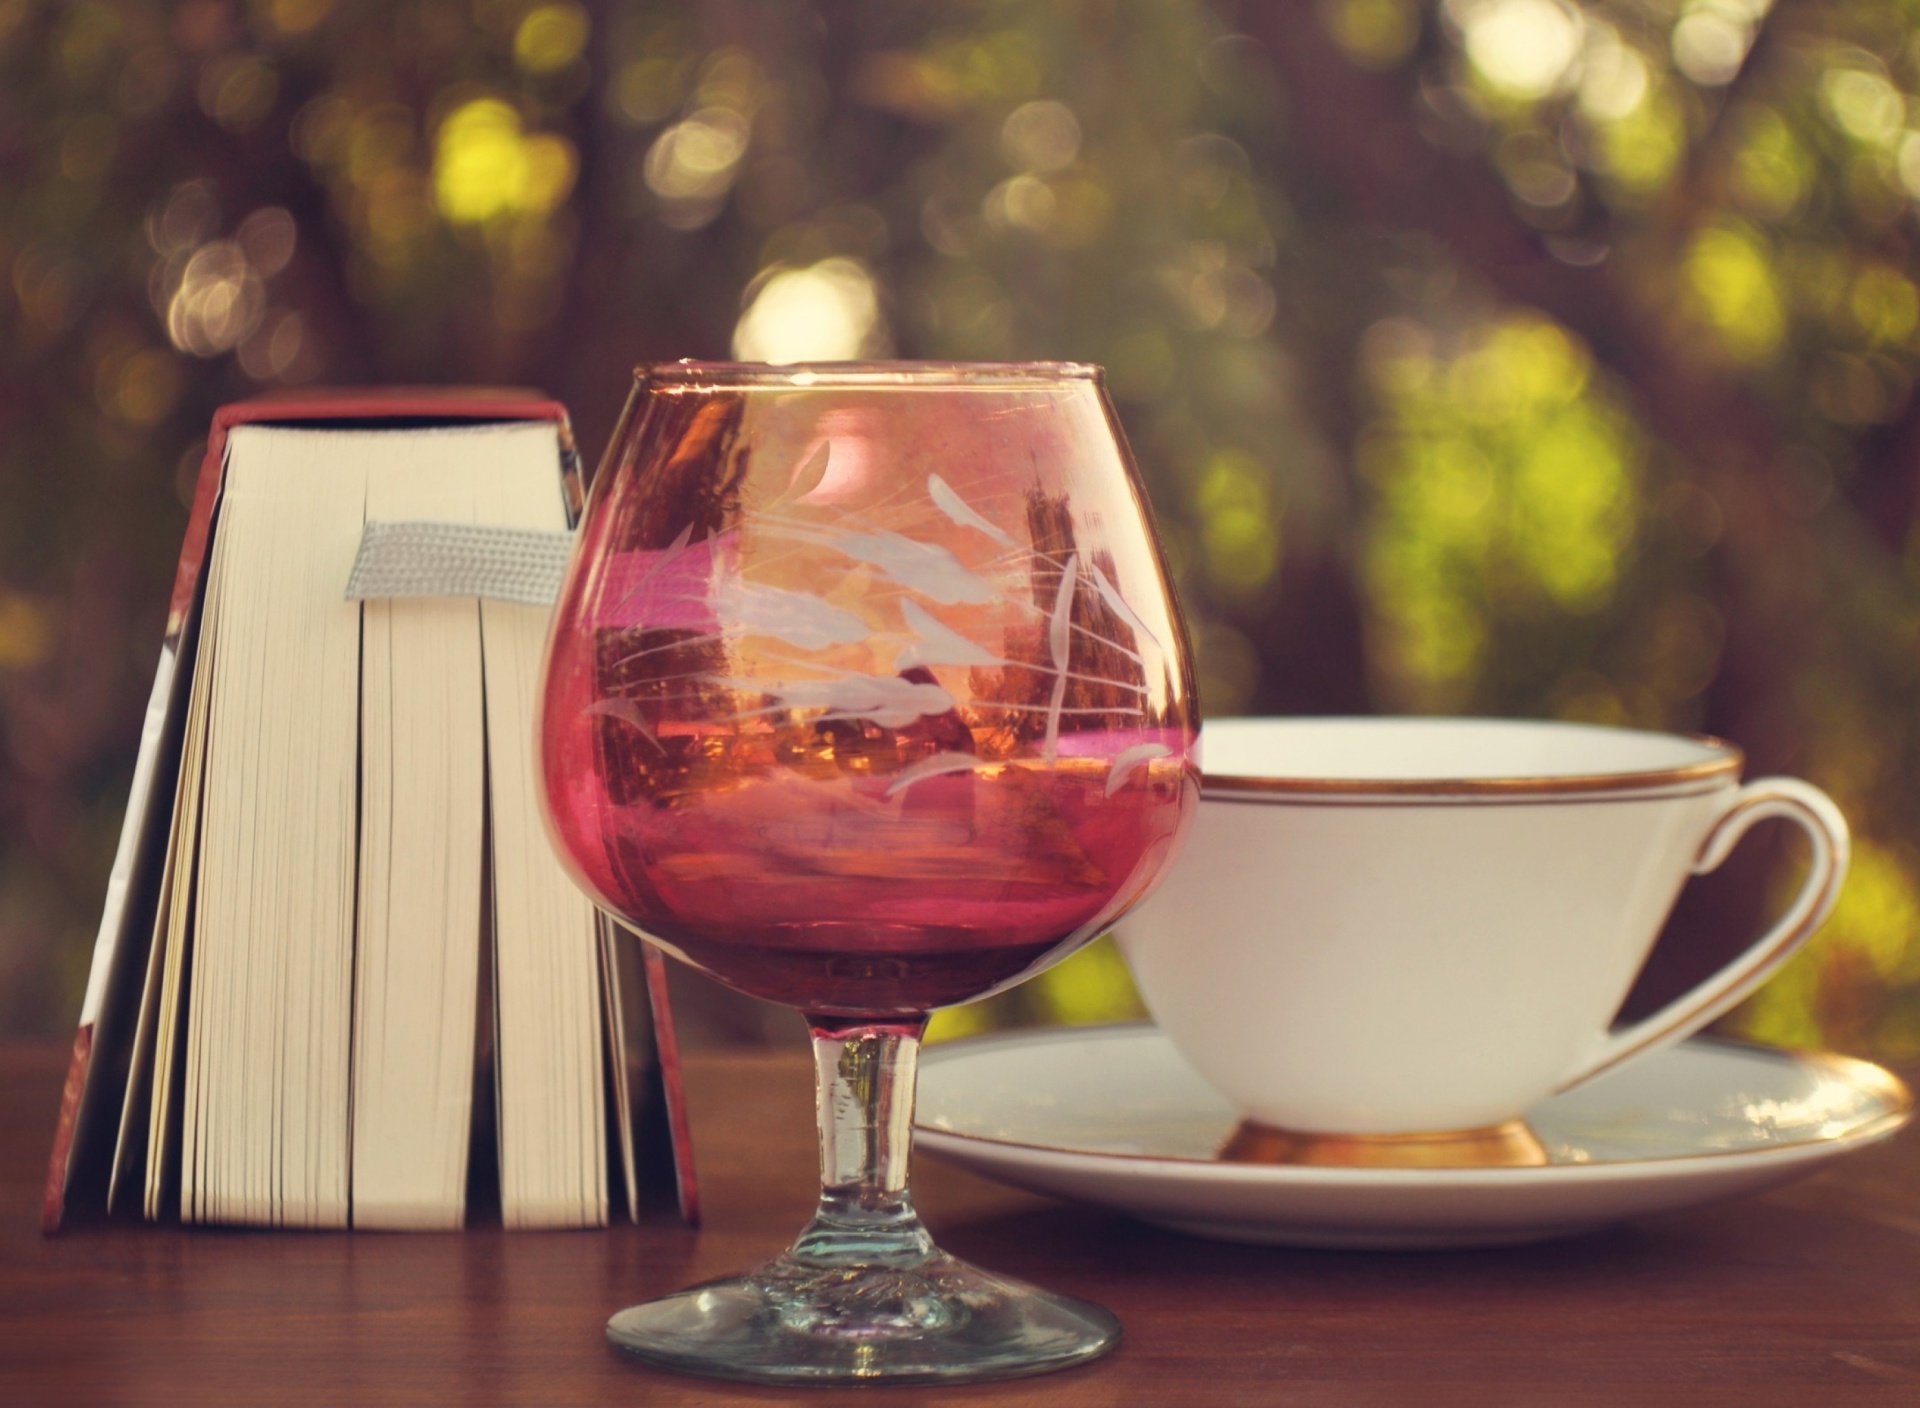 Perfect day with wine and book screenshot #1 1920x1408